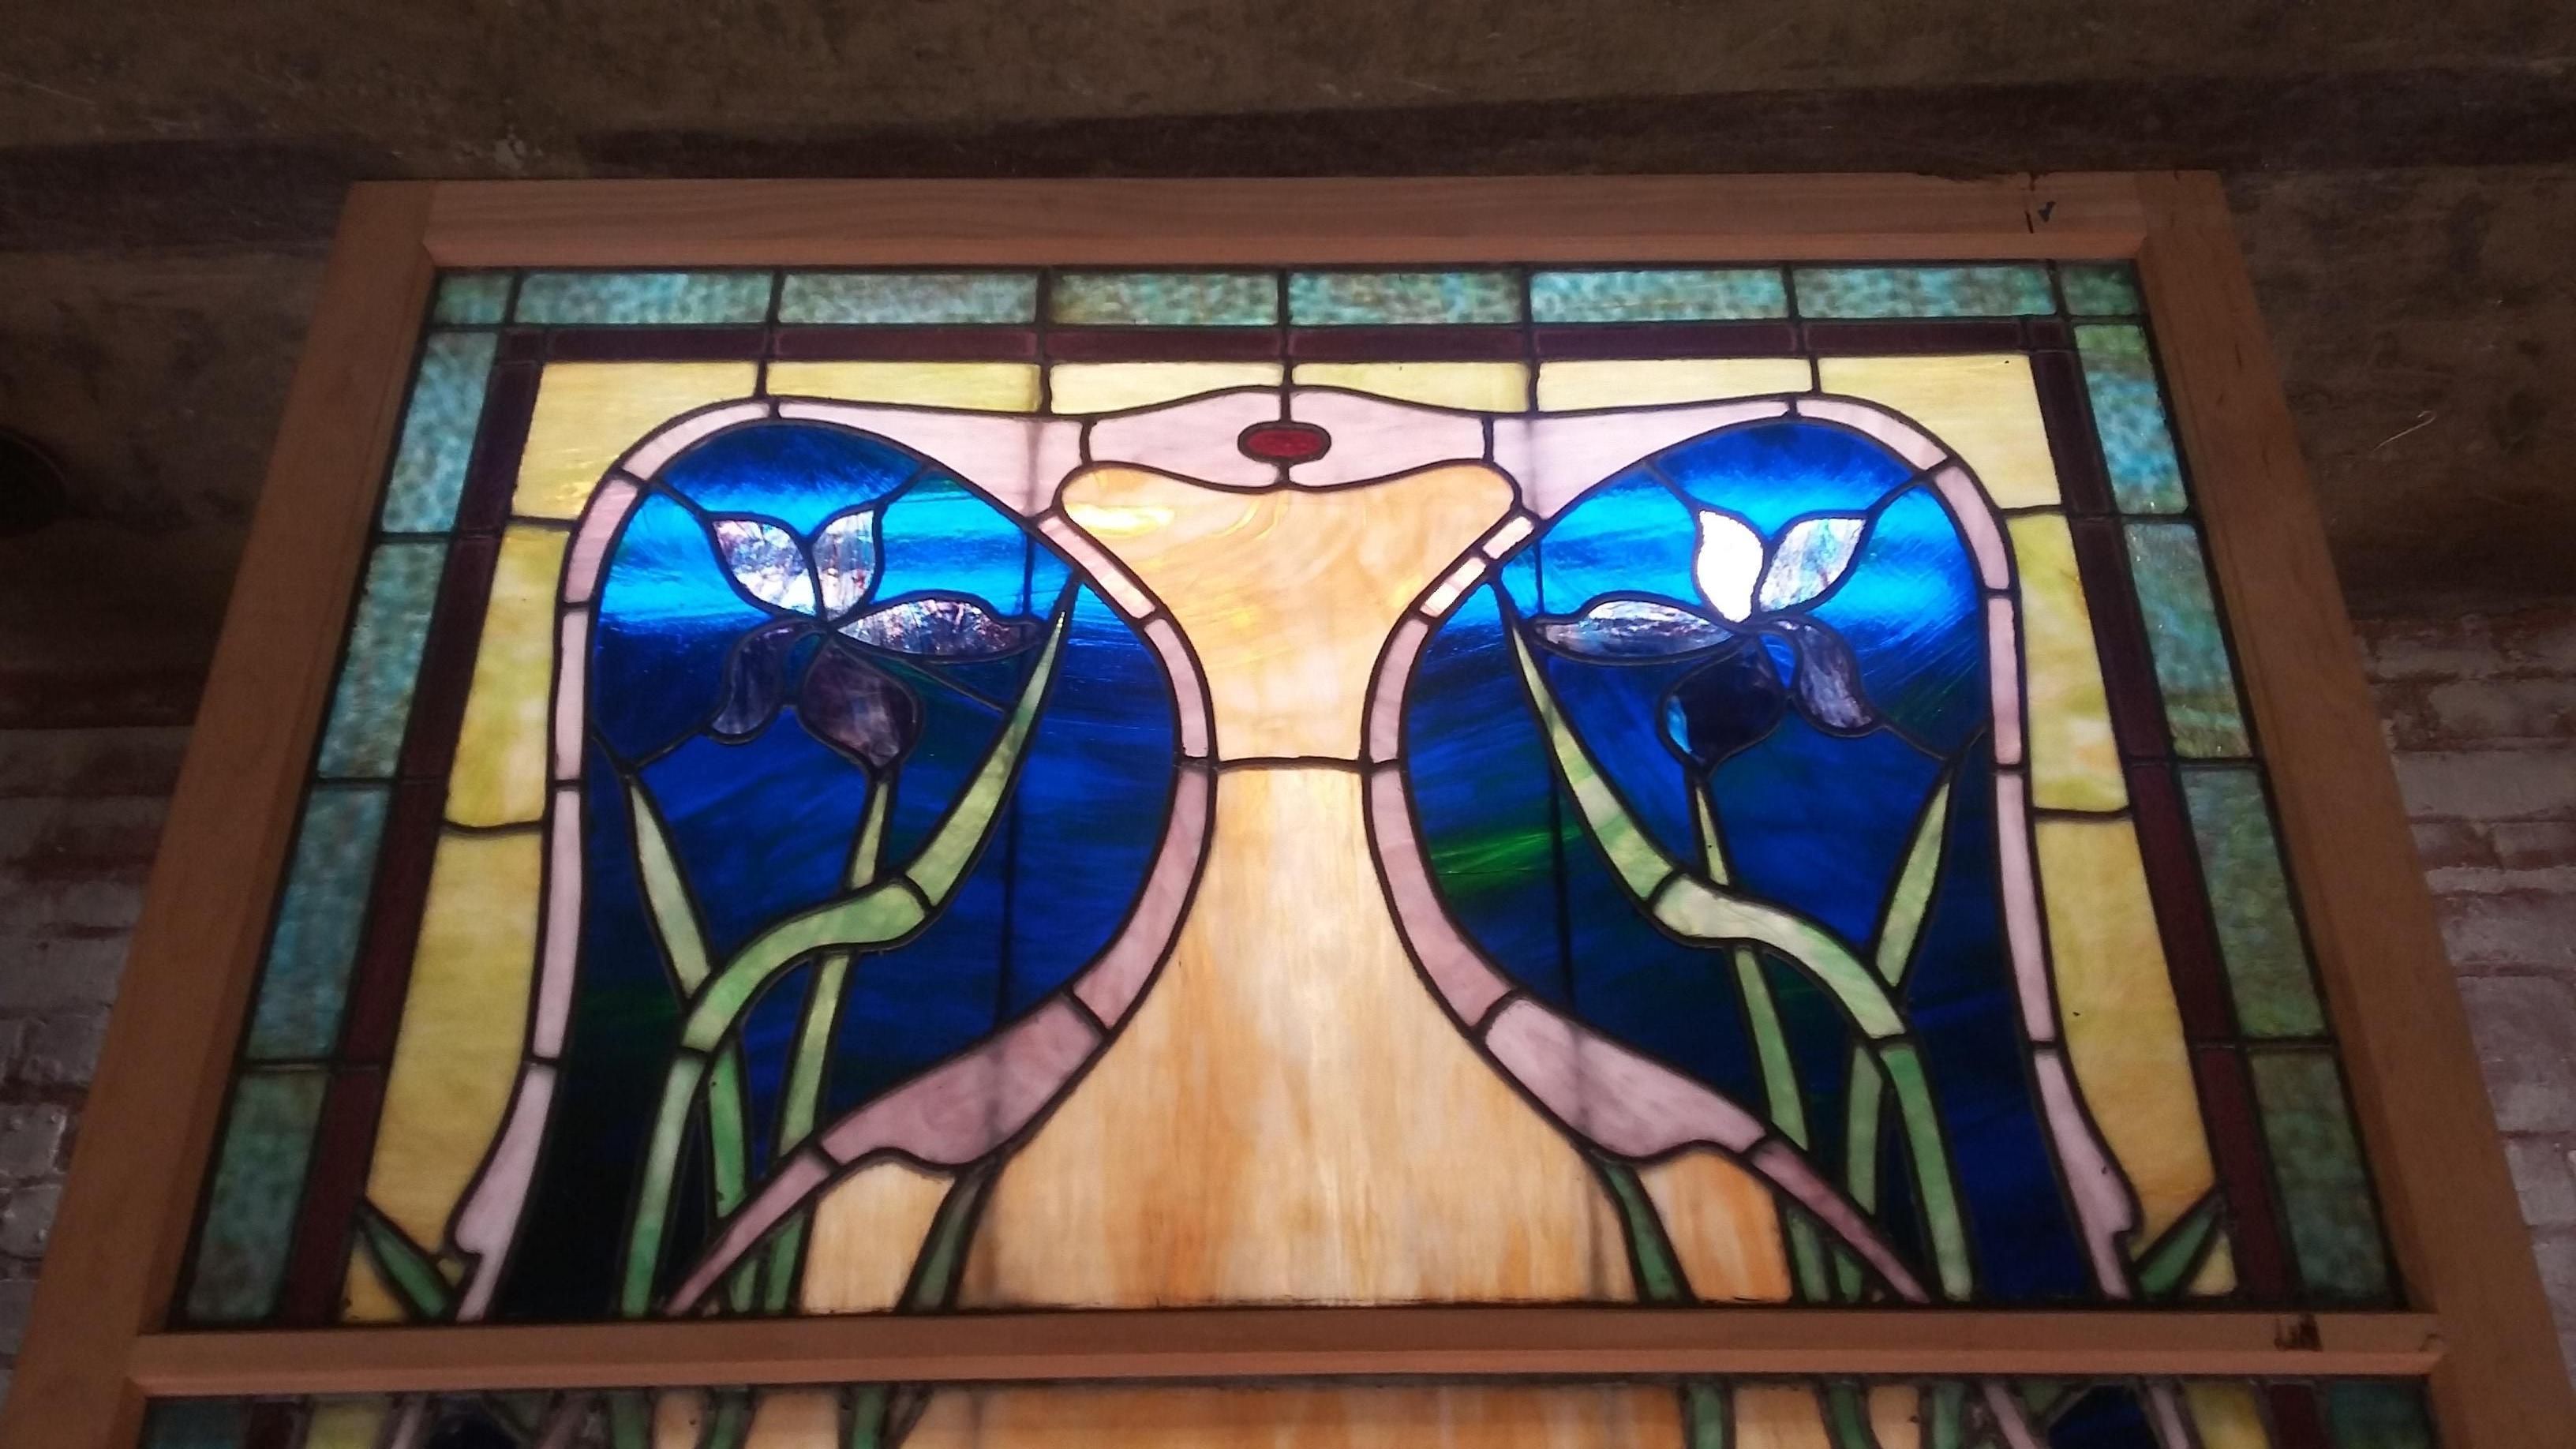 Beautiful vintage 19th century stained-glass window. Original window but has been reframed. An usual style Art Nouveau with multiple colored glass (blue, green, amber) and wonderful floral motif.. Original window is 2 sections but it has been